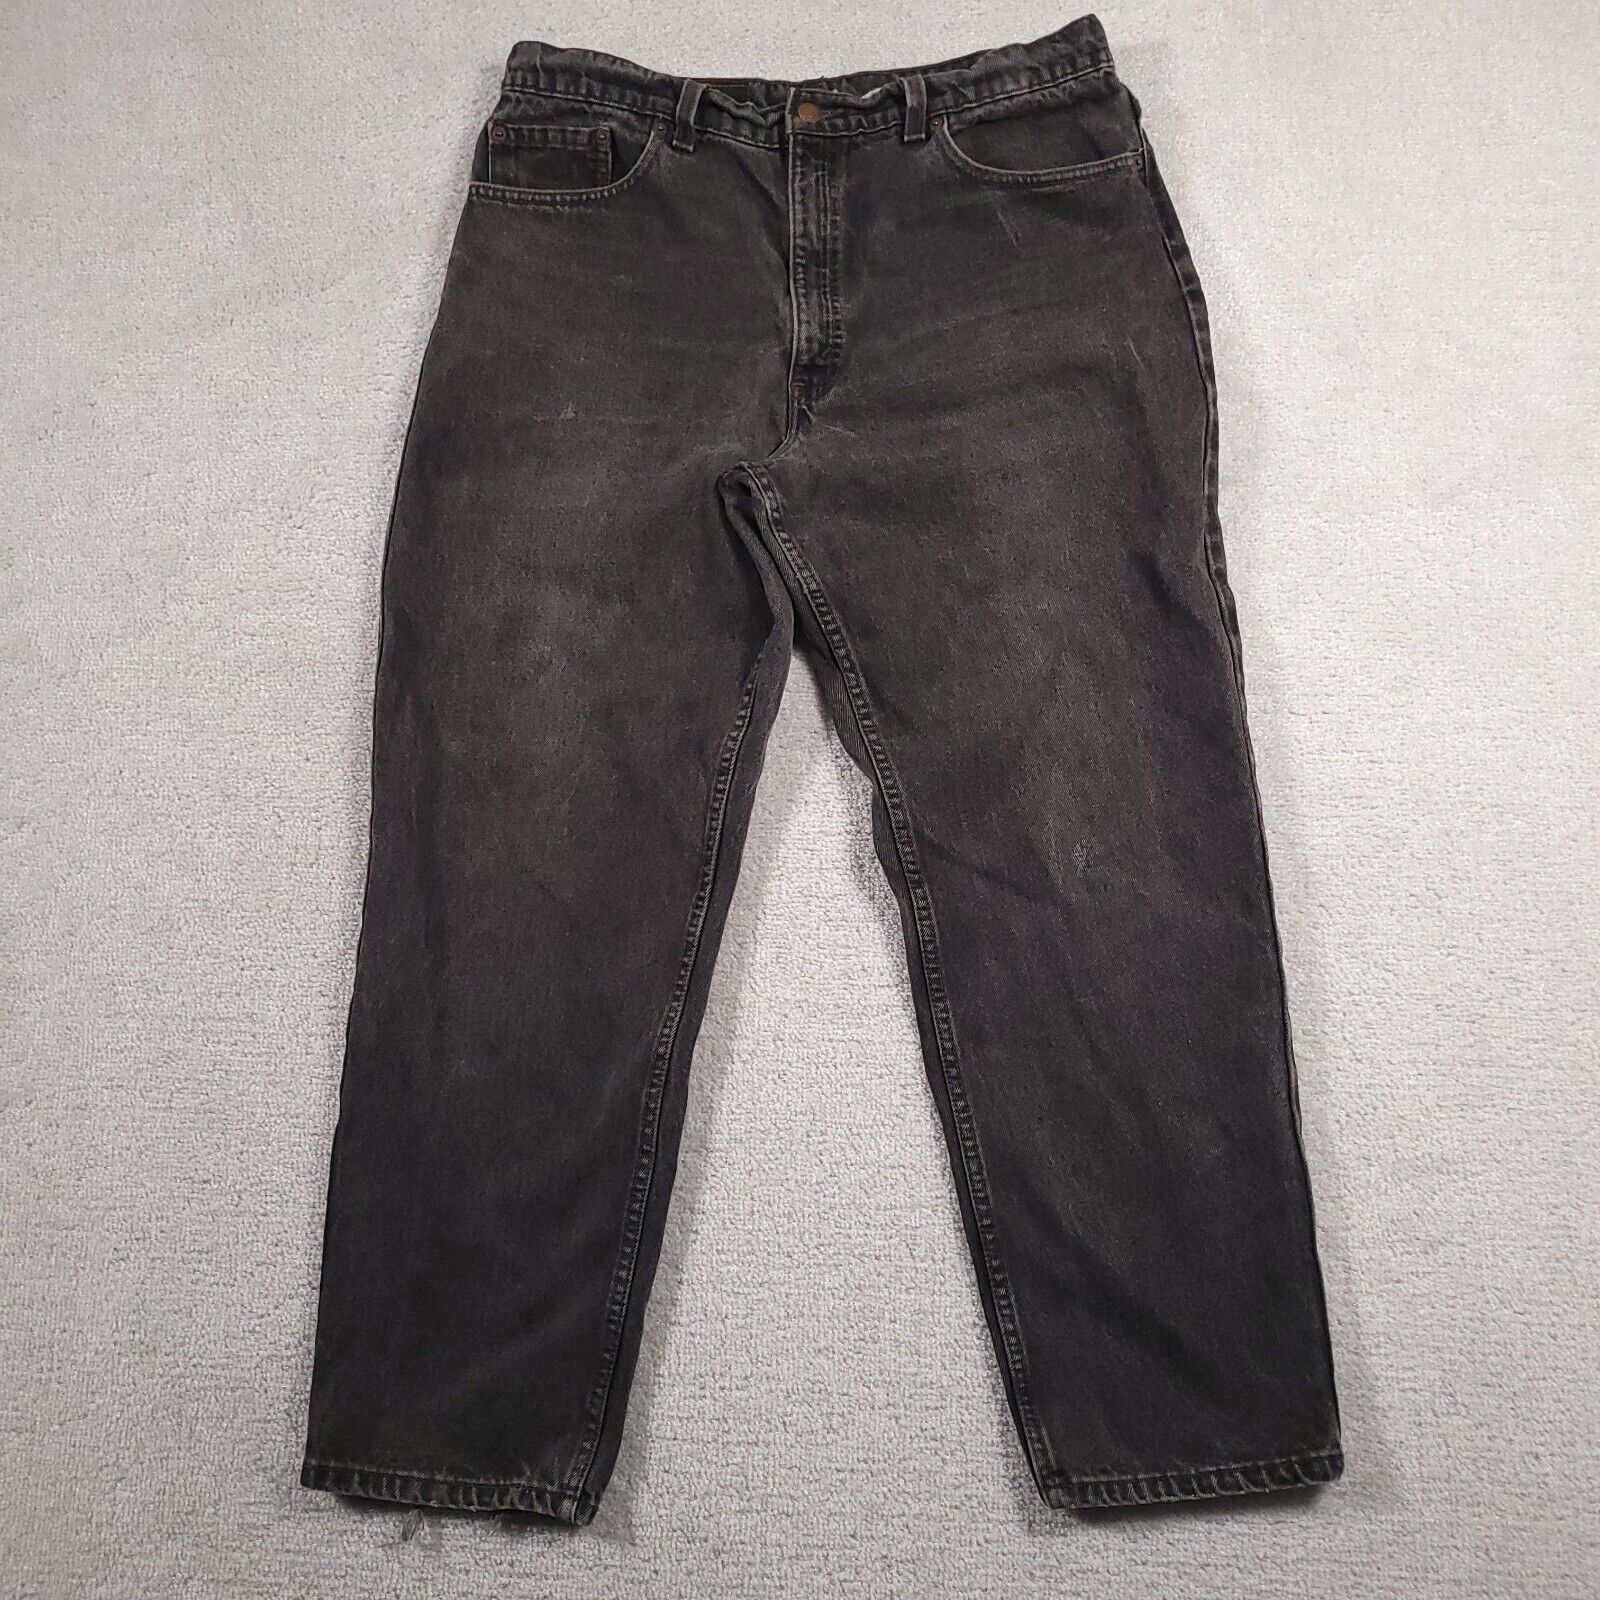 Vintage Levi\'s Mens 550 Black Denim Relaxed Fit Tapered Leg Jeans 38x30 USA Made